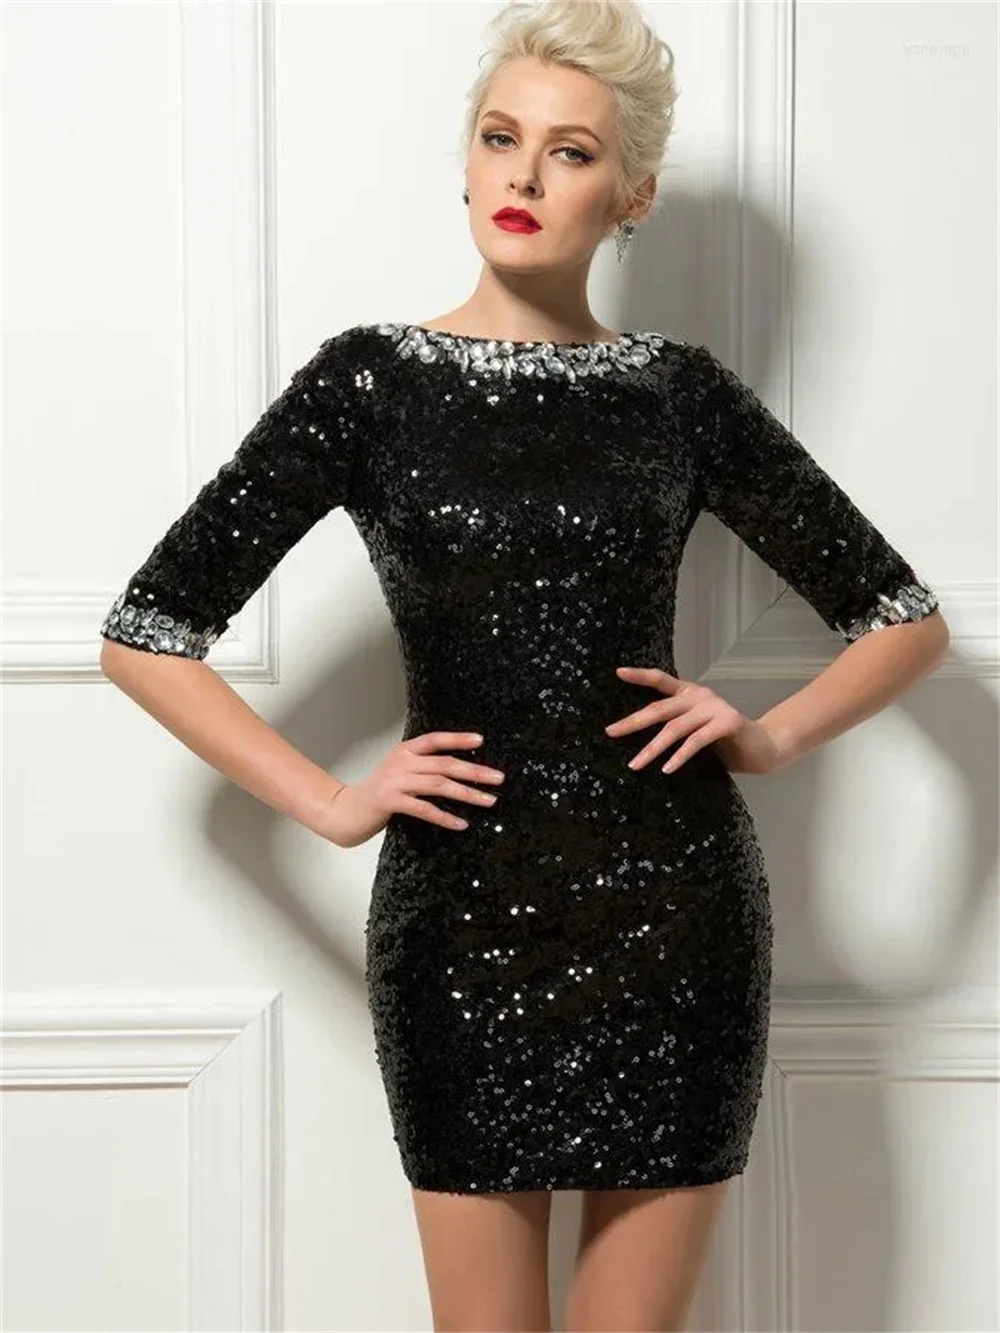 

Luxury Black Sheath Sequins Short Cocktail Dresses for Women 2022 Sexy Bateau Neck Beading Formal Evening Homecoming Party Gowns